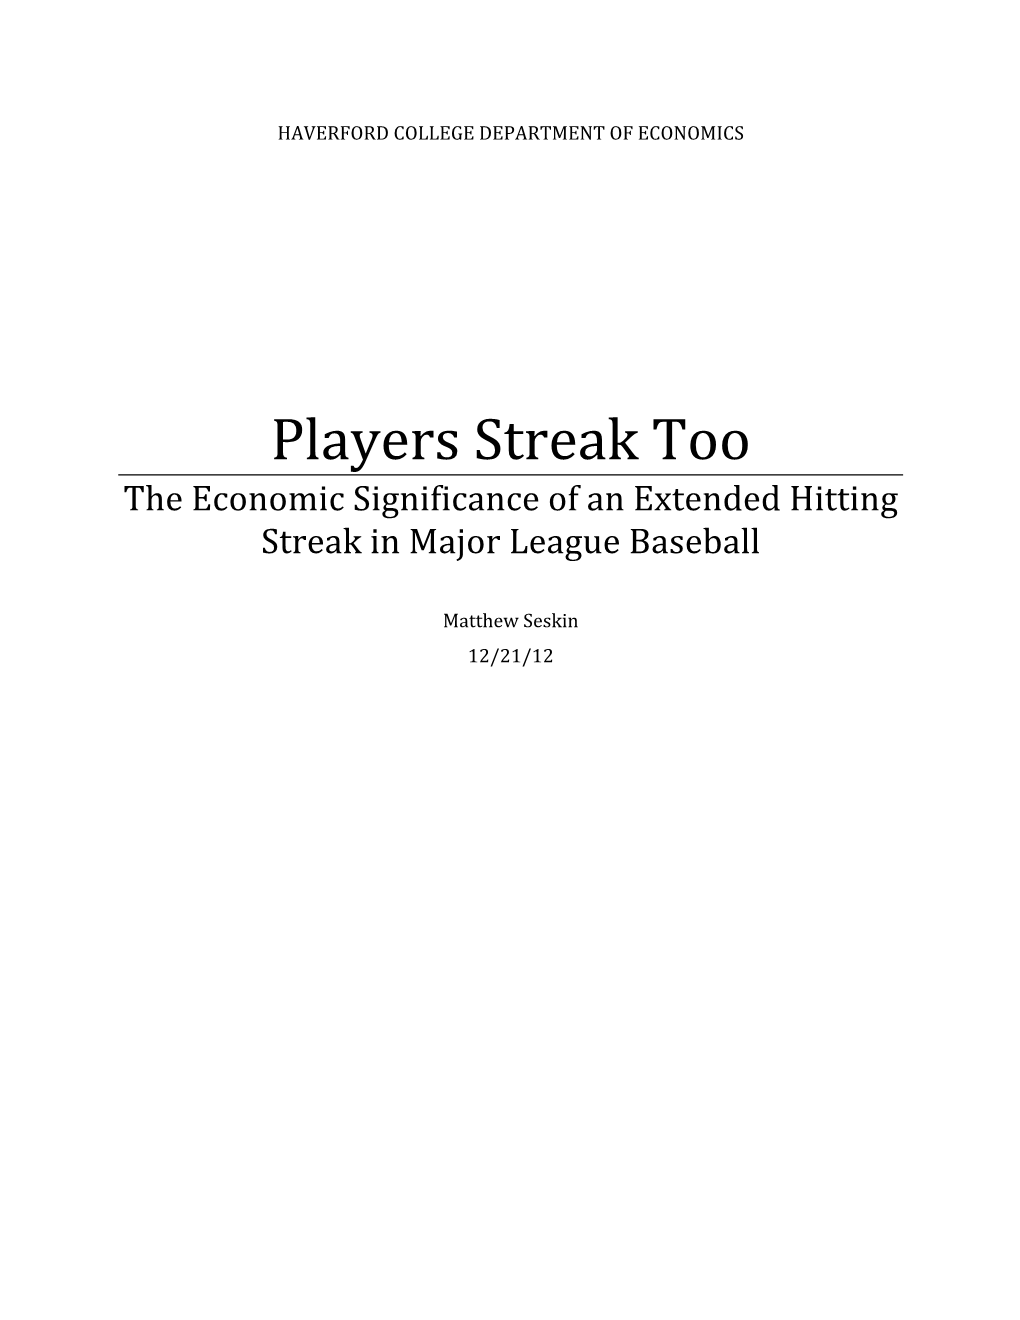 Players Streak Too the Economic Significance of an Extended Hitting Streak in Major League Baseball